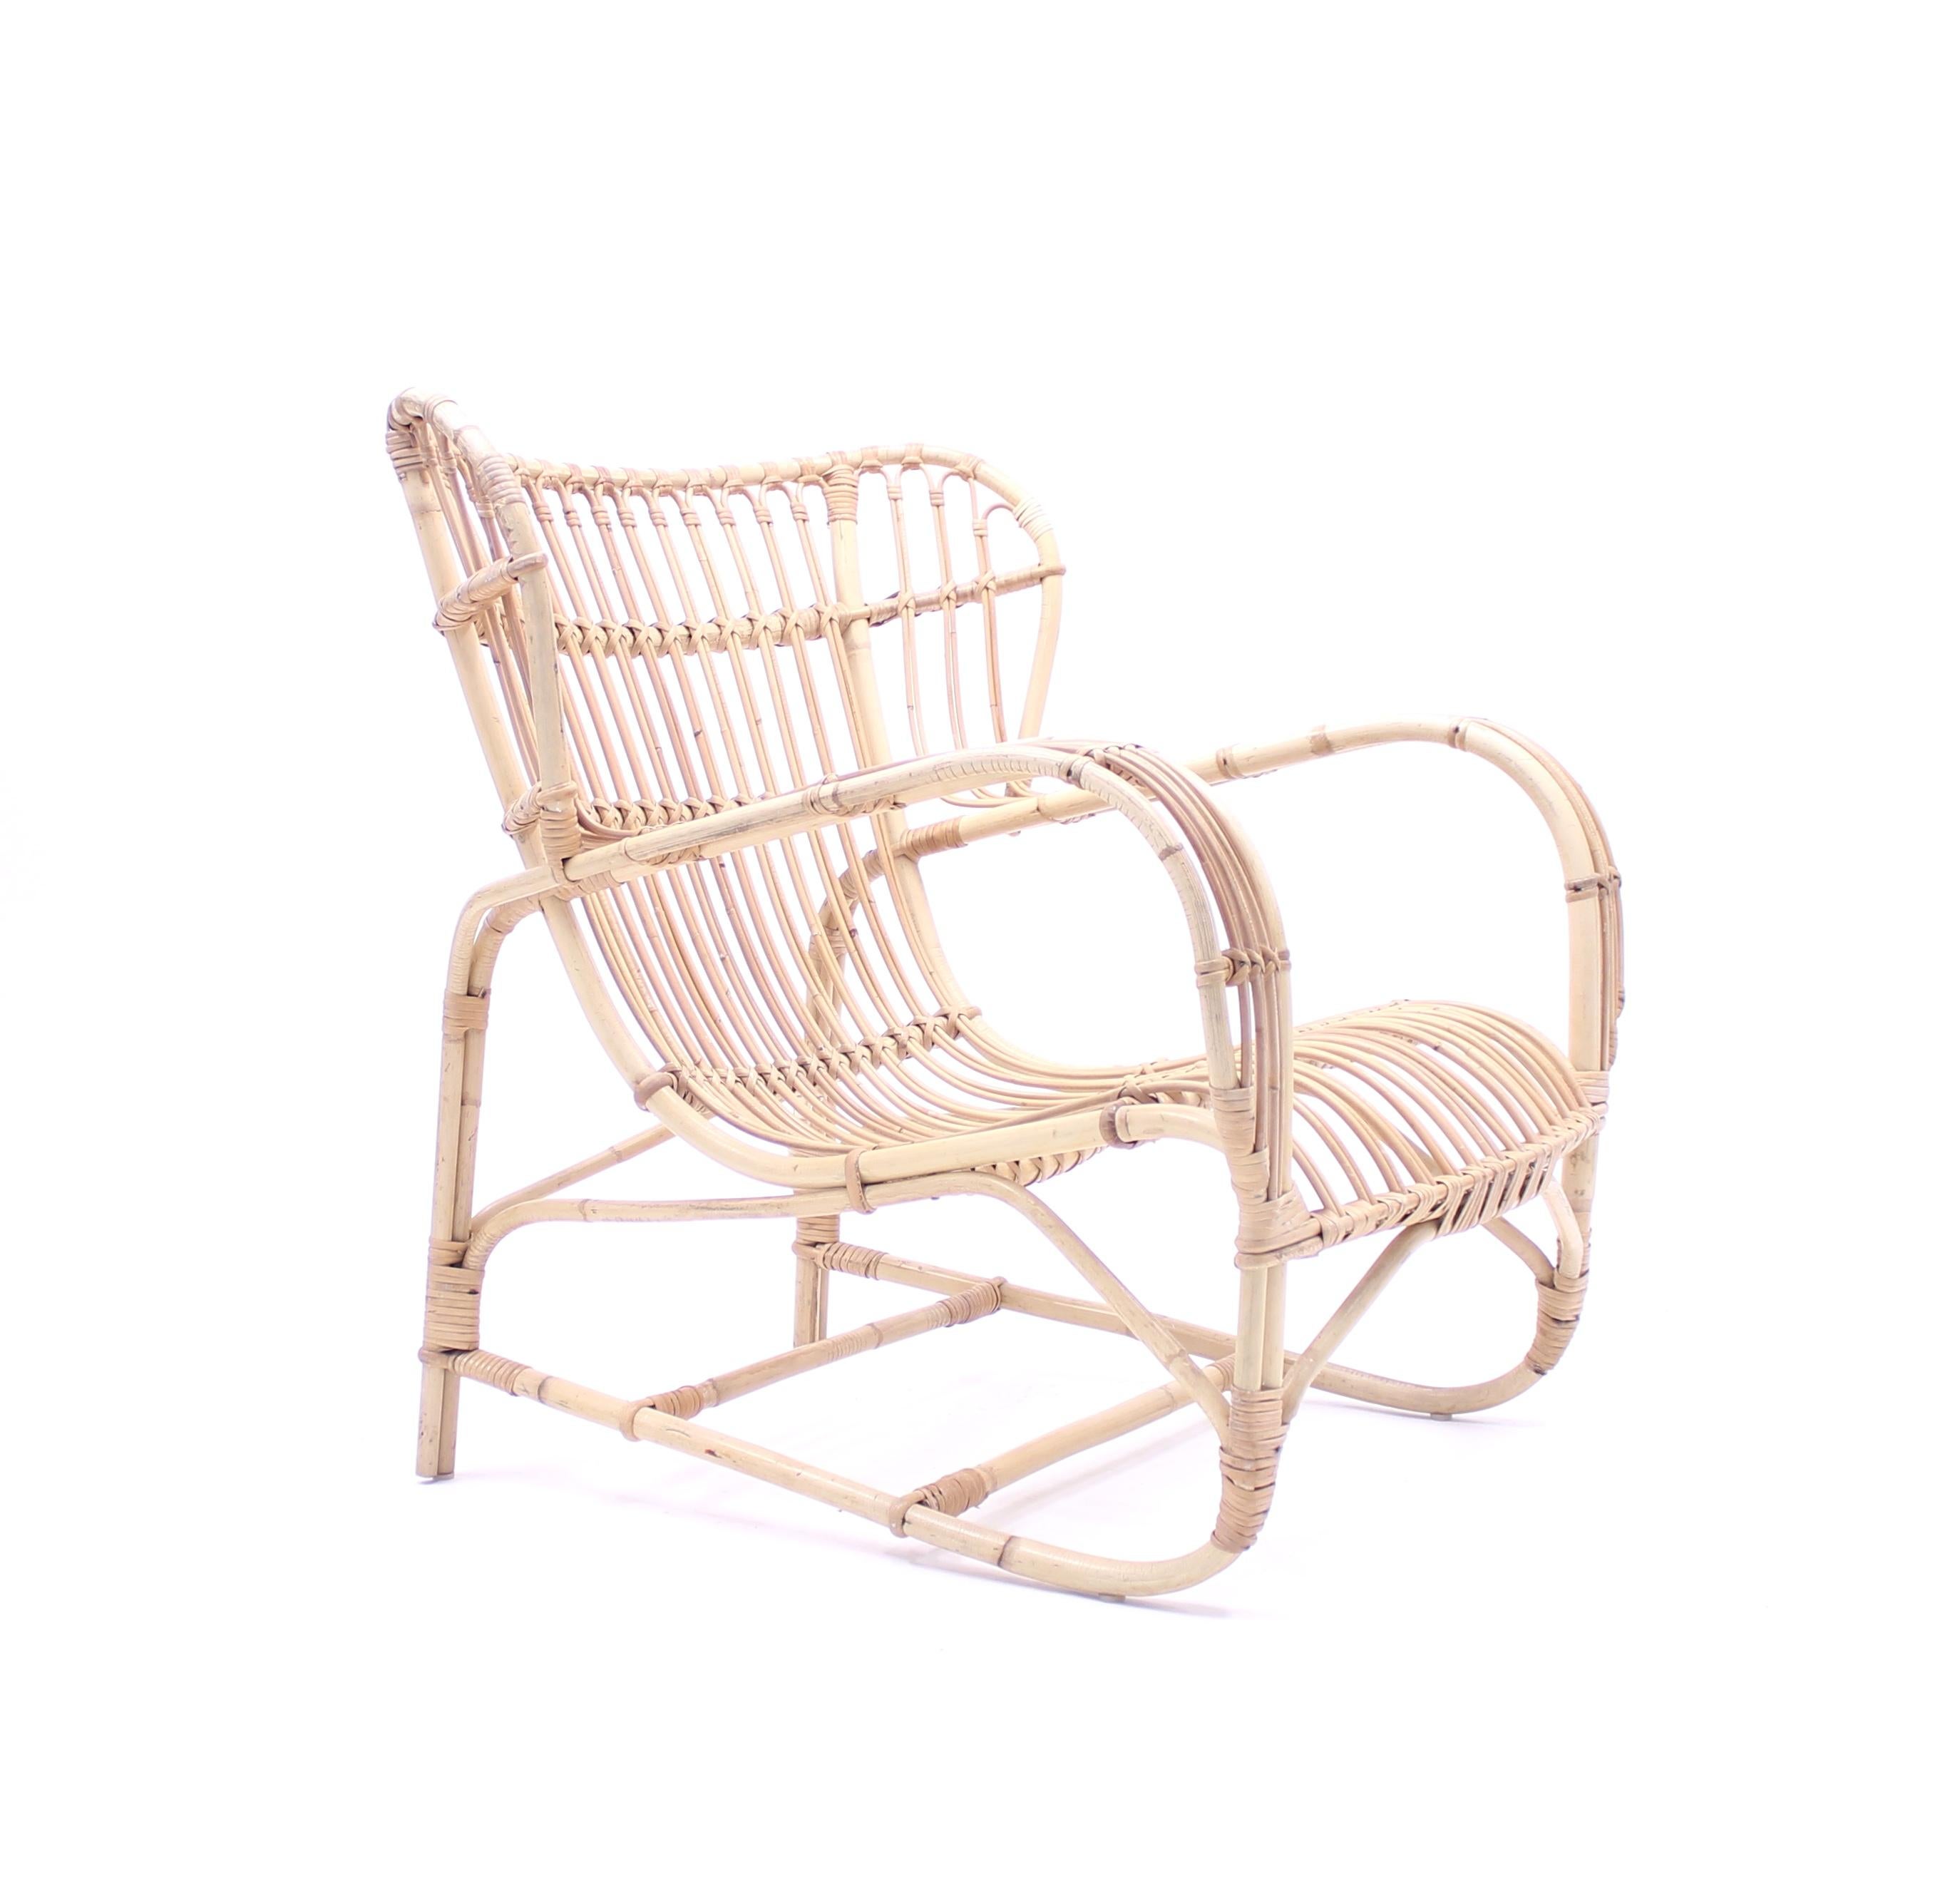 Bamboo and rattan lounge chair designed by Danish architect Viggo Boesen in the 1930s. This example of an unknown producer is of a slightly later production, circa 1960s. Good vintage condition with ware consistent with age and use.